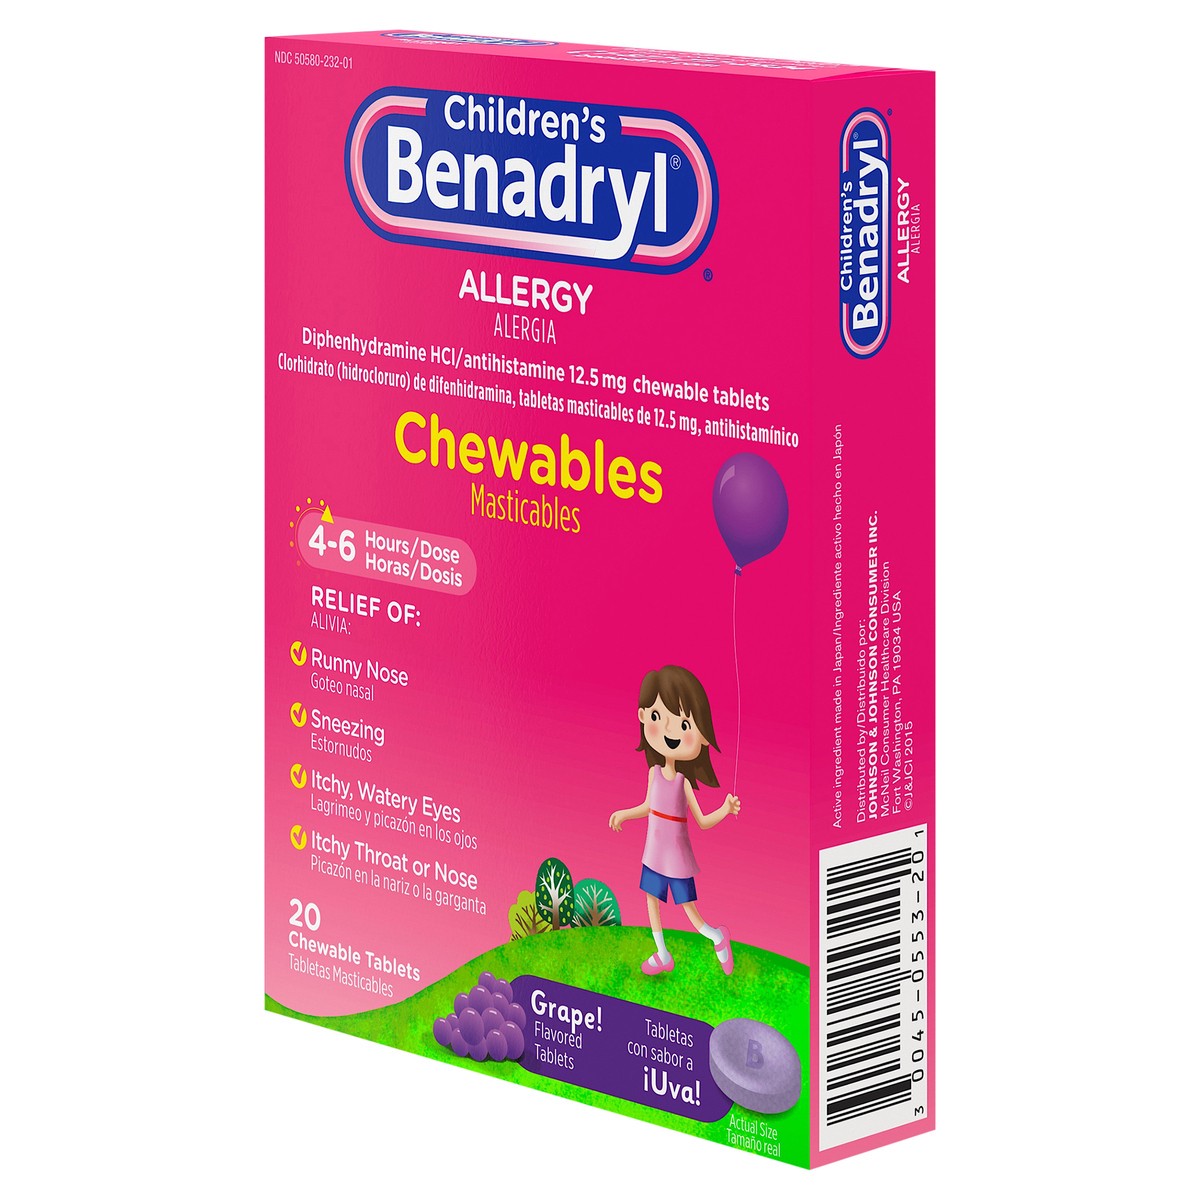 slide 3 of 7, Benadryl Allergy Chewables with Diphenhydramine HCl, Antihistamine Chewable Tablets For Relief of Allergy Symptoms Like Sneezing, Itchy Eyes, & More, Grape Flavor,, 20 ct